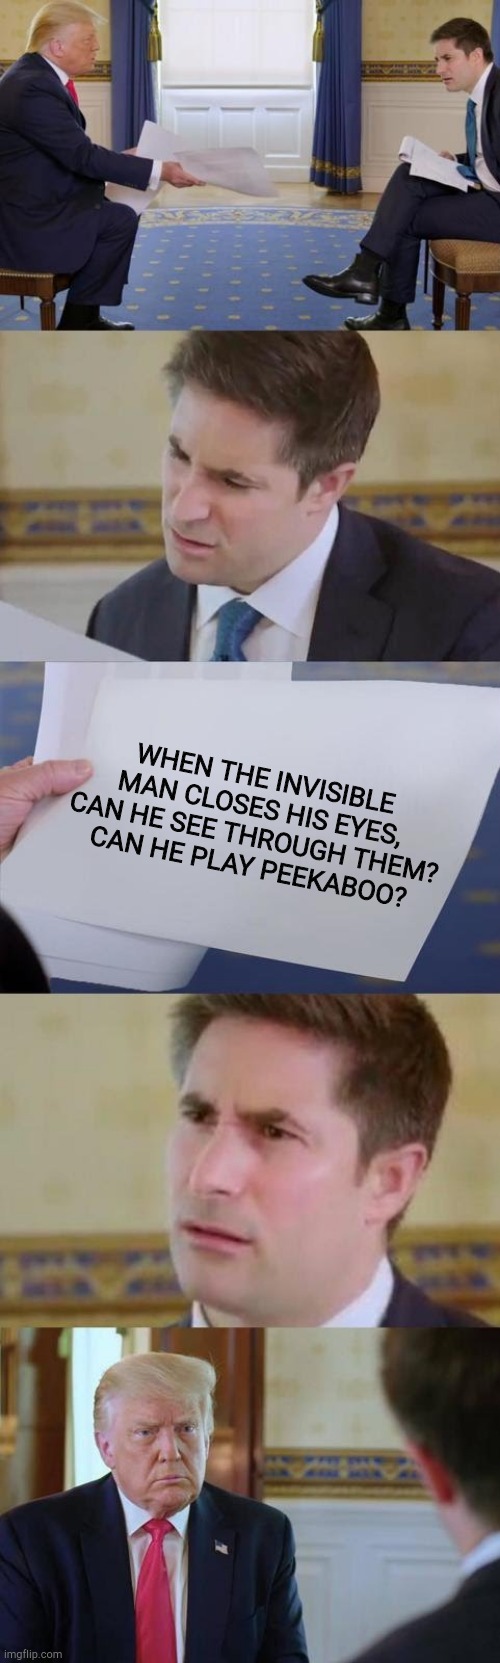 Invisible man questions | WHEN THE INVISIBLE MAN CLOSES HIS EYES, CAN HE SEE THROUGH THEM?
CAN HE PLAY PEEKABOO? | image tagged in confused reporter | made w/ Imgflip meme maker